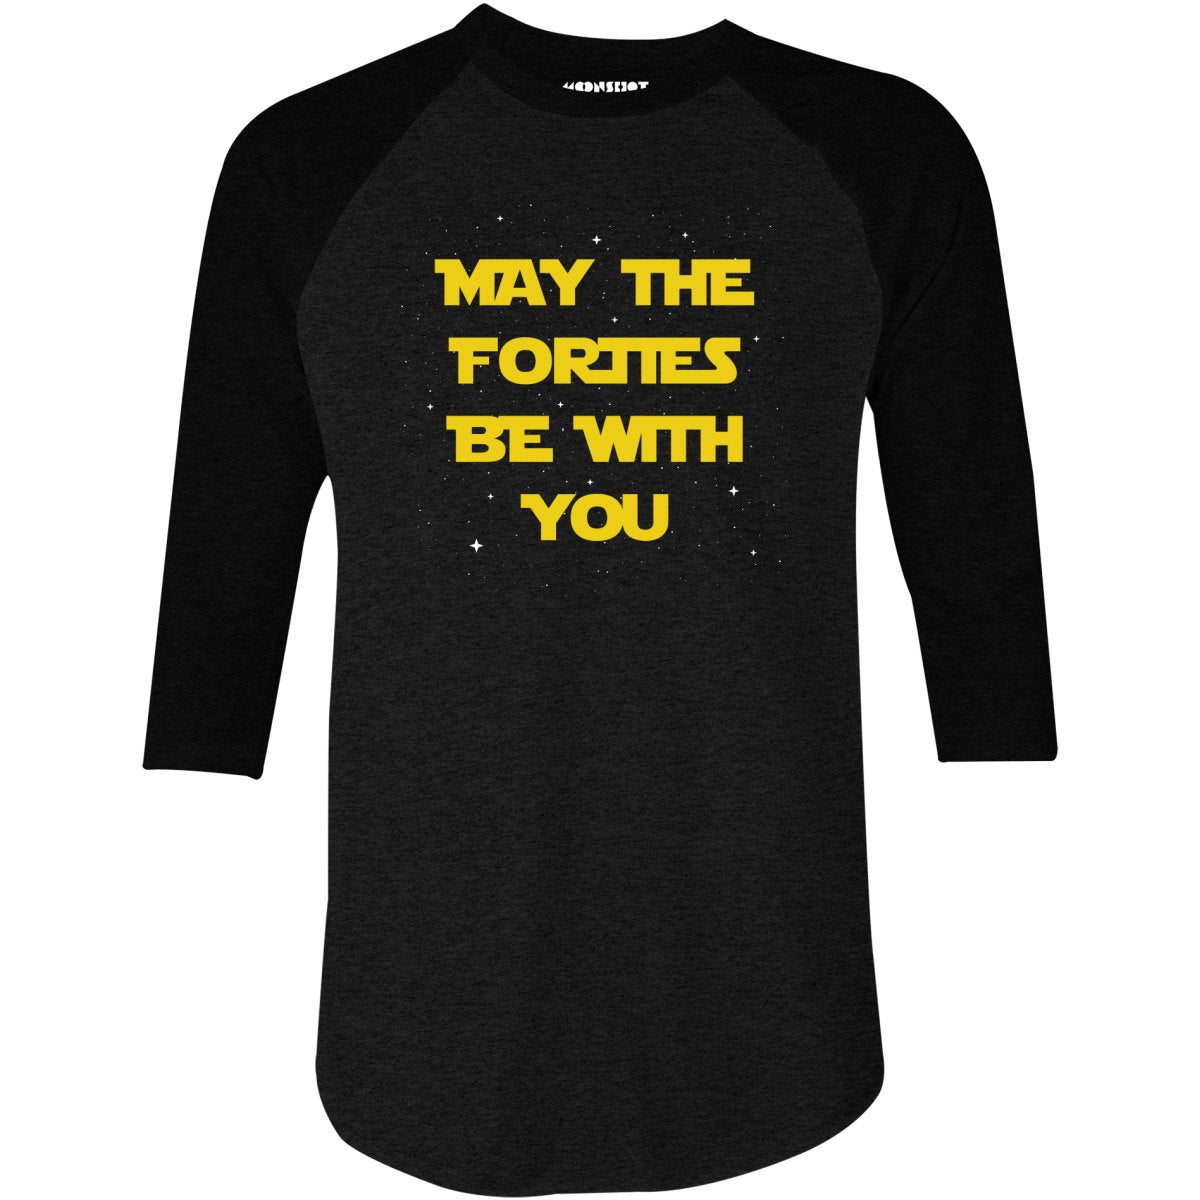 May The Forties Be With You - 3/4 Sleeve Raglan T-Shirt